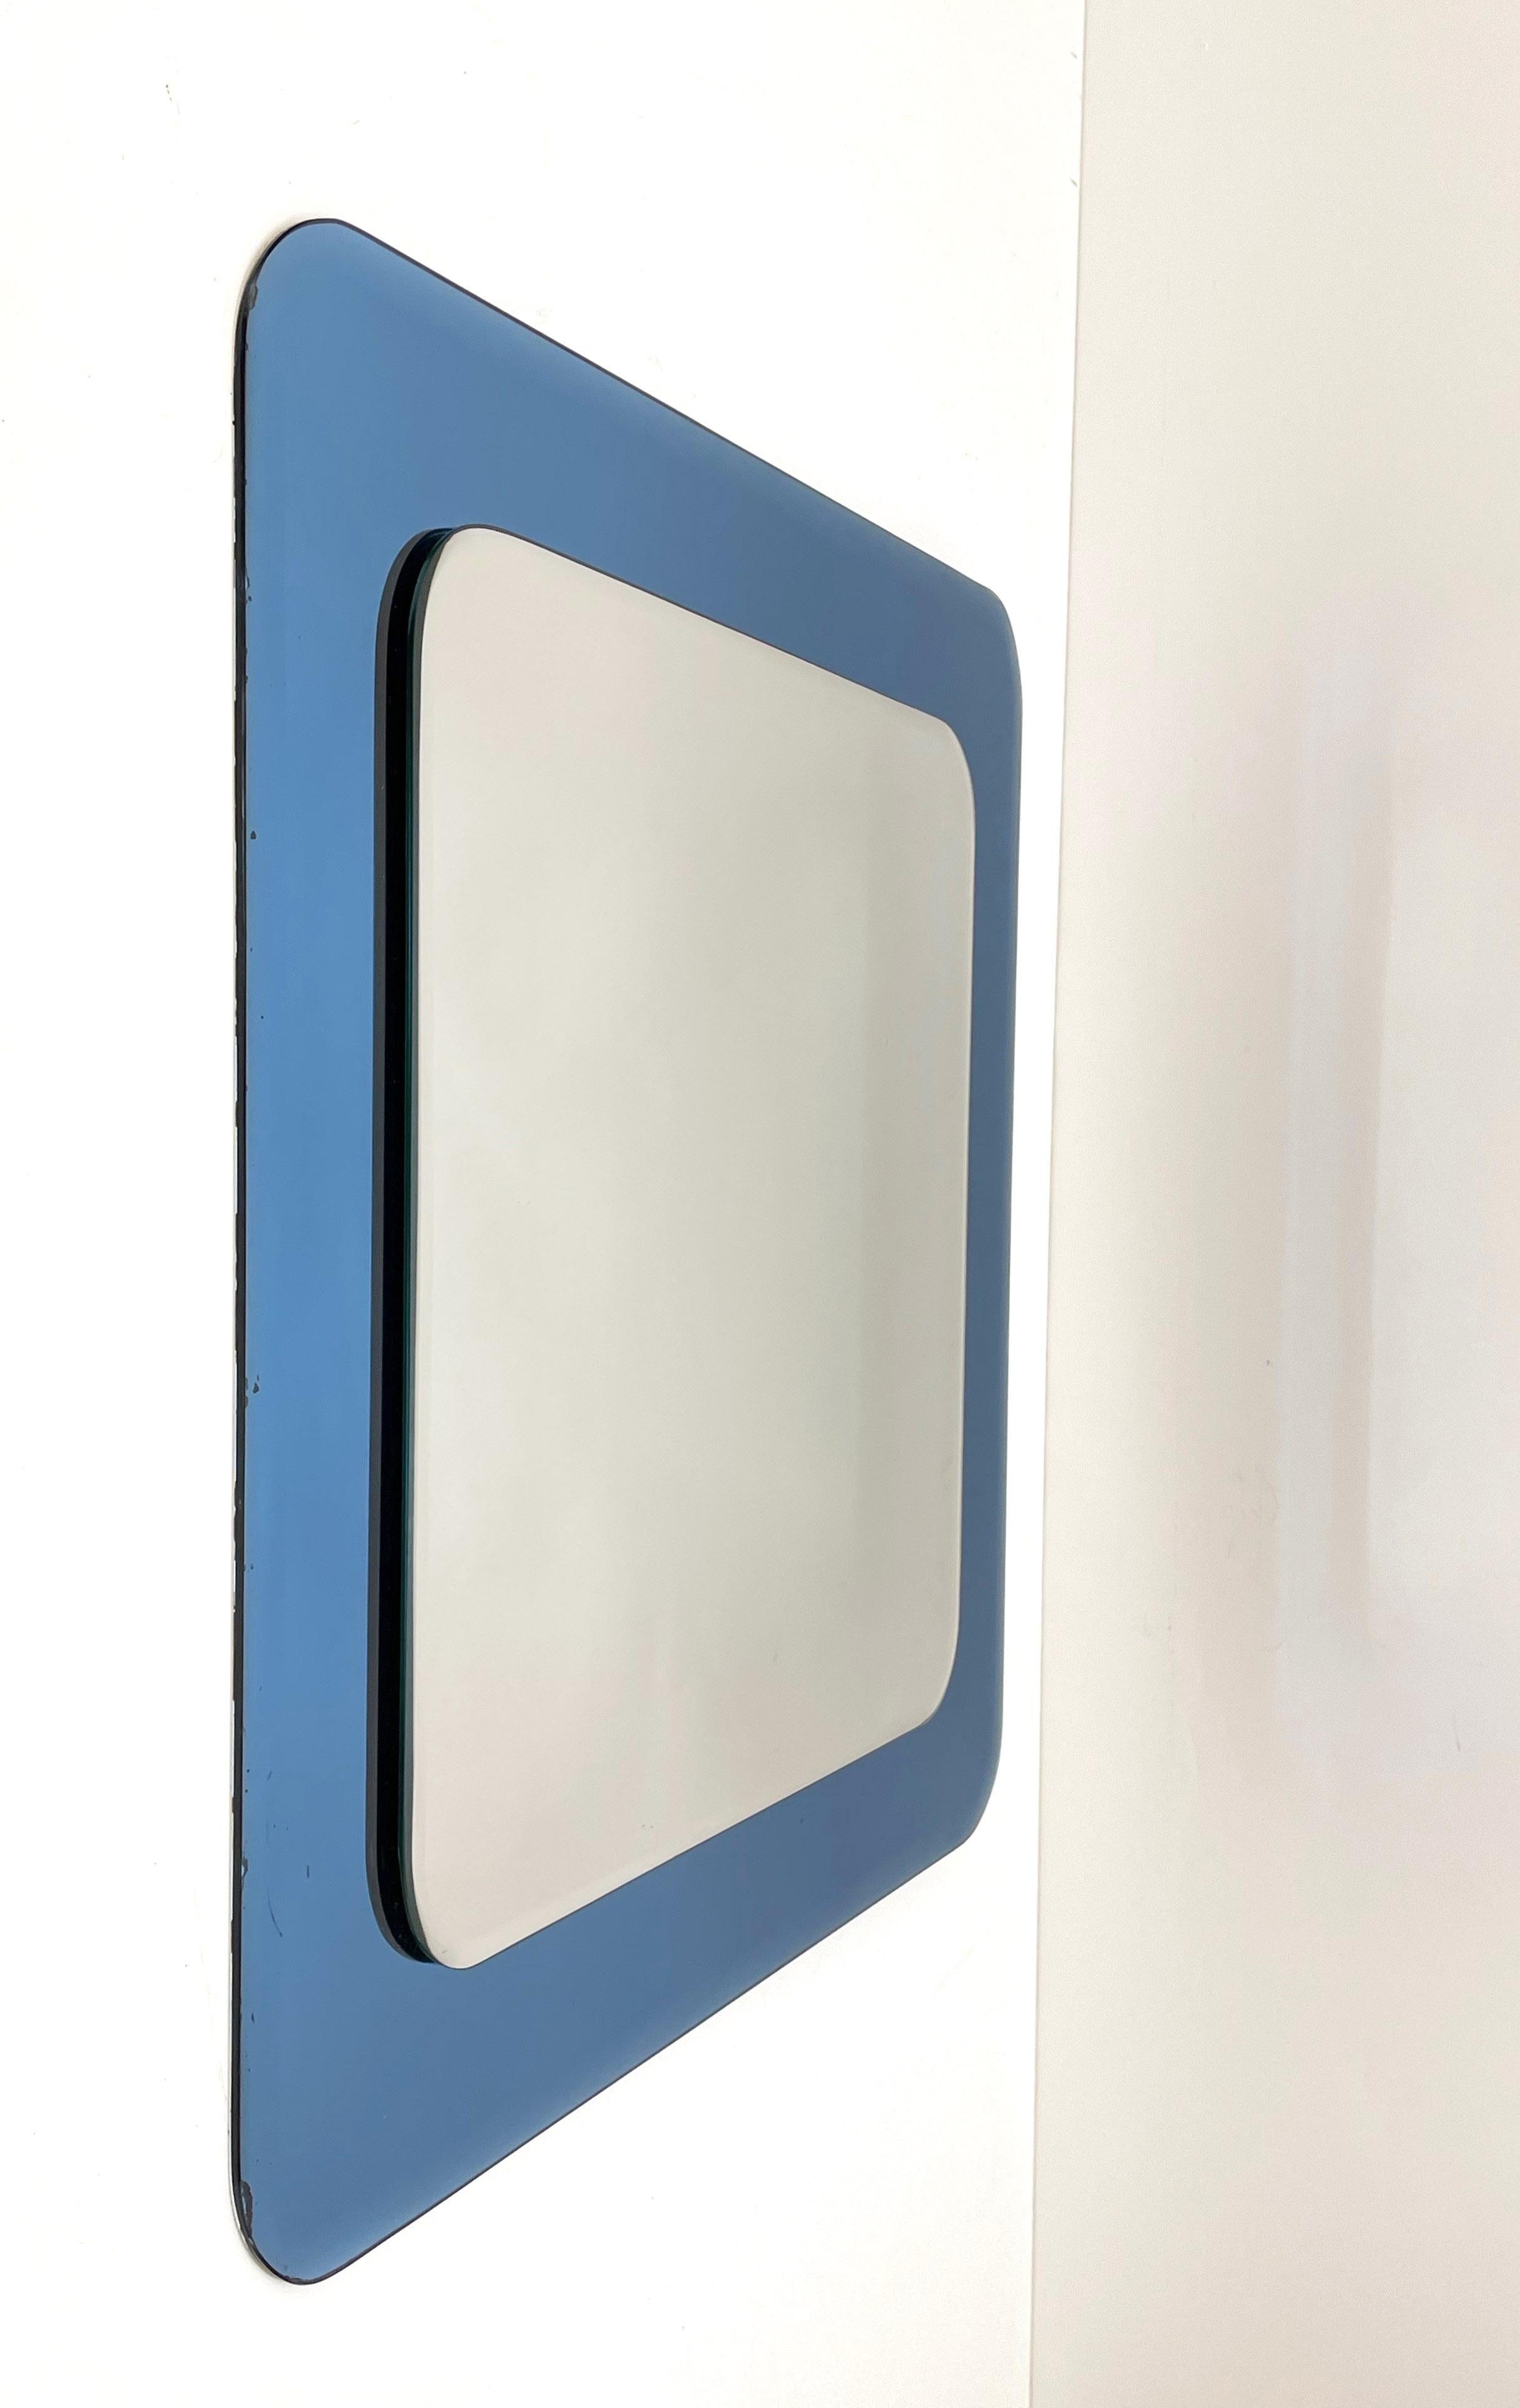 Midcentury Cristal Art Square Italian Wall Mirror with Blue Glass Frame, 1960s For Sale 1